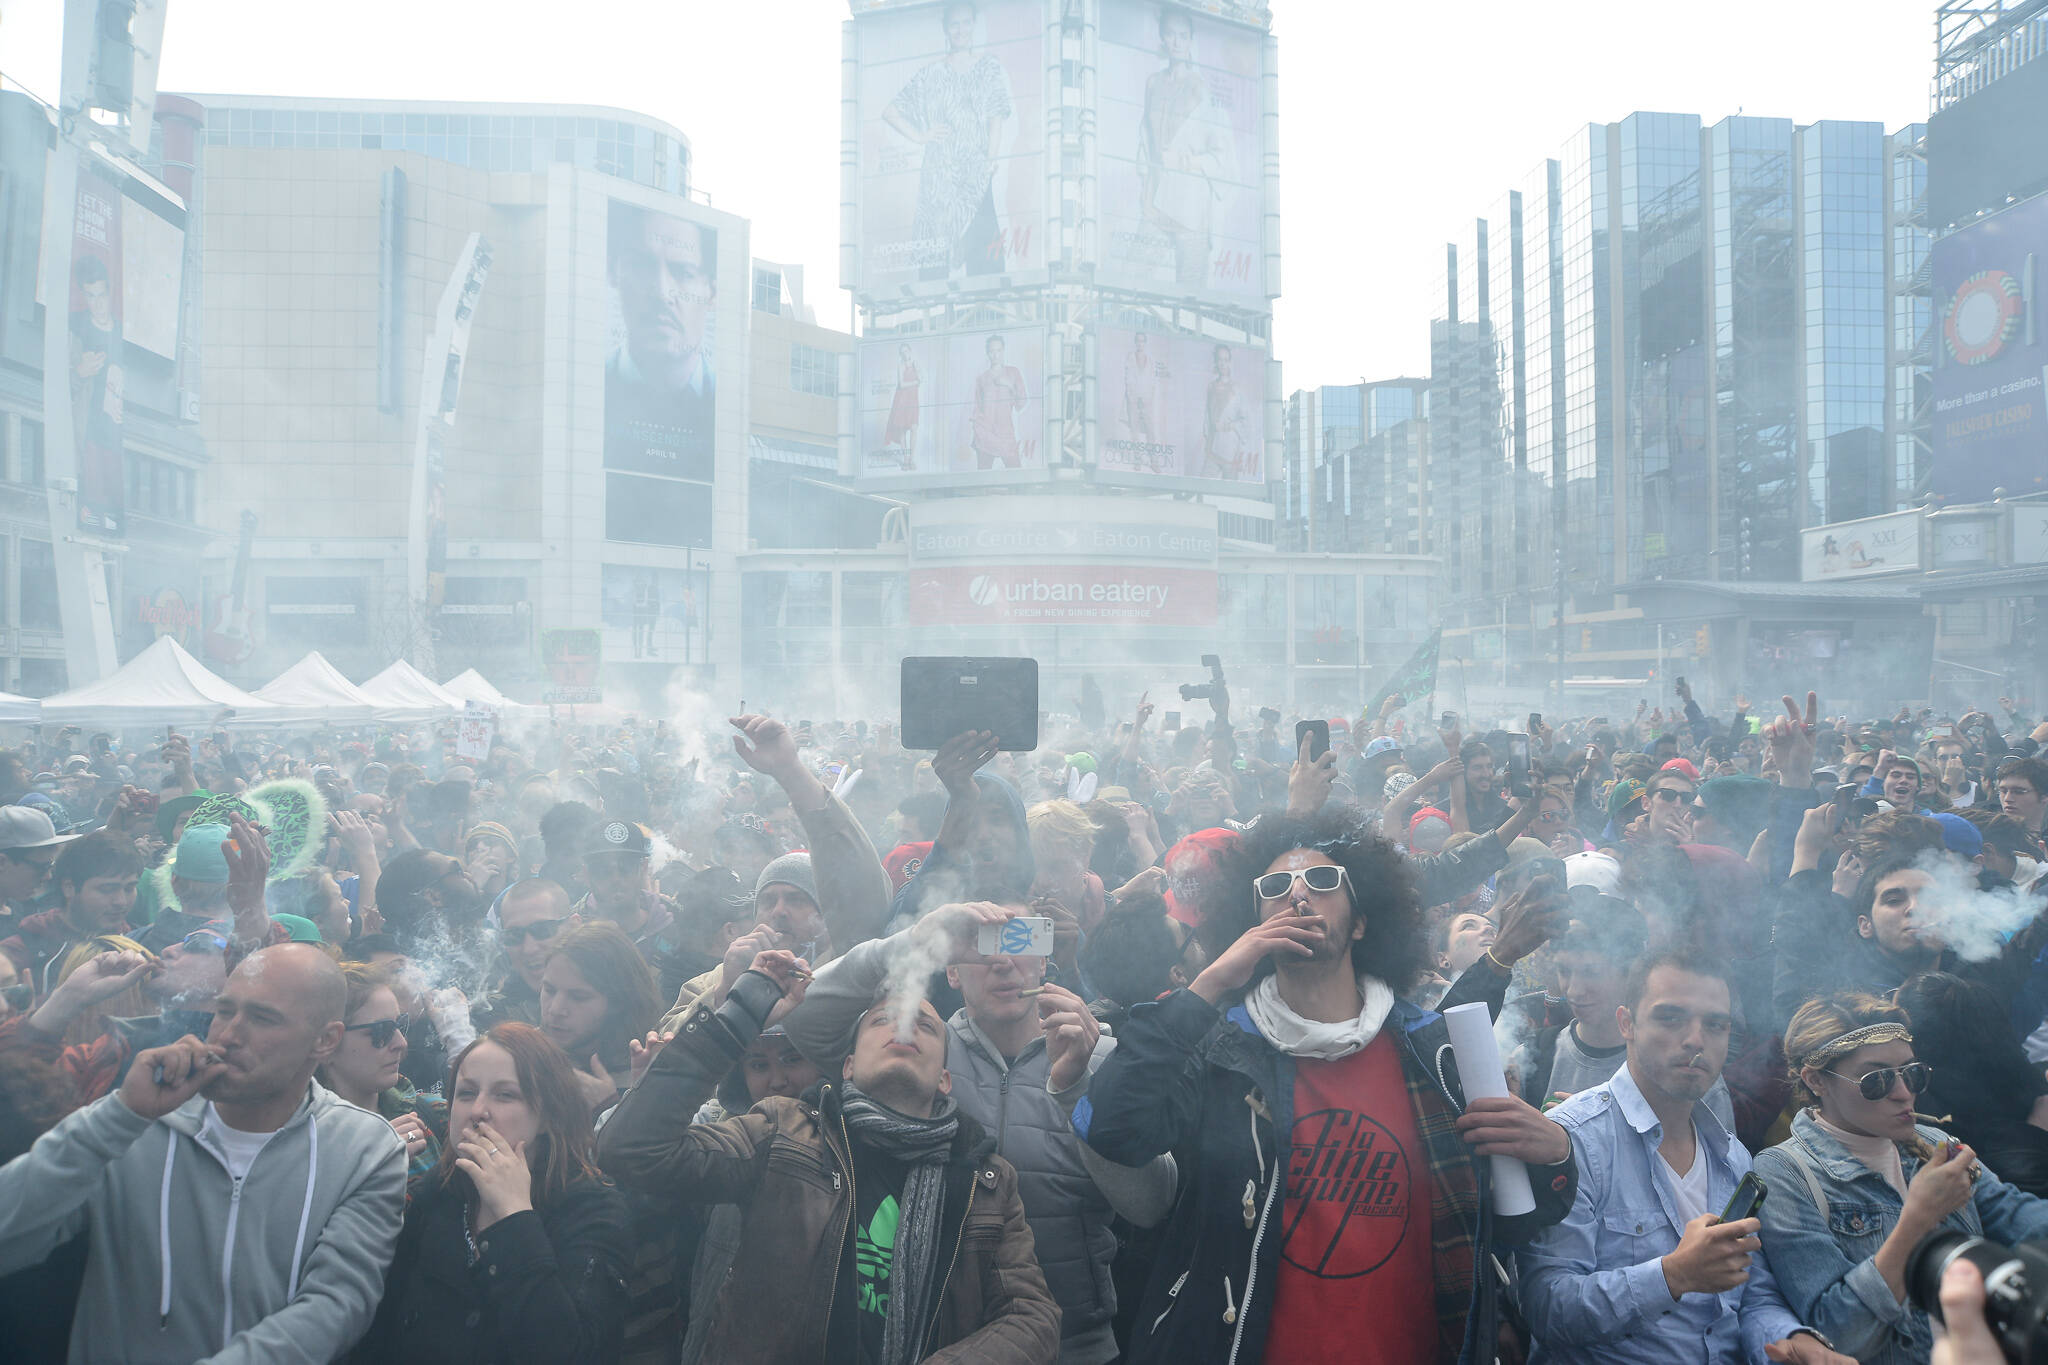 Toronto's annual 420 event plans to go on without a permit